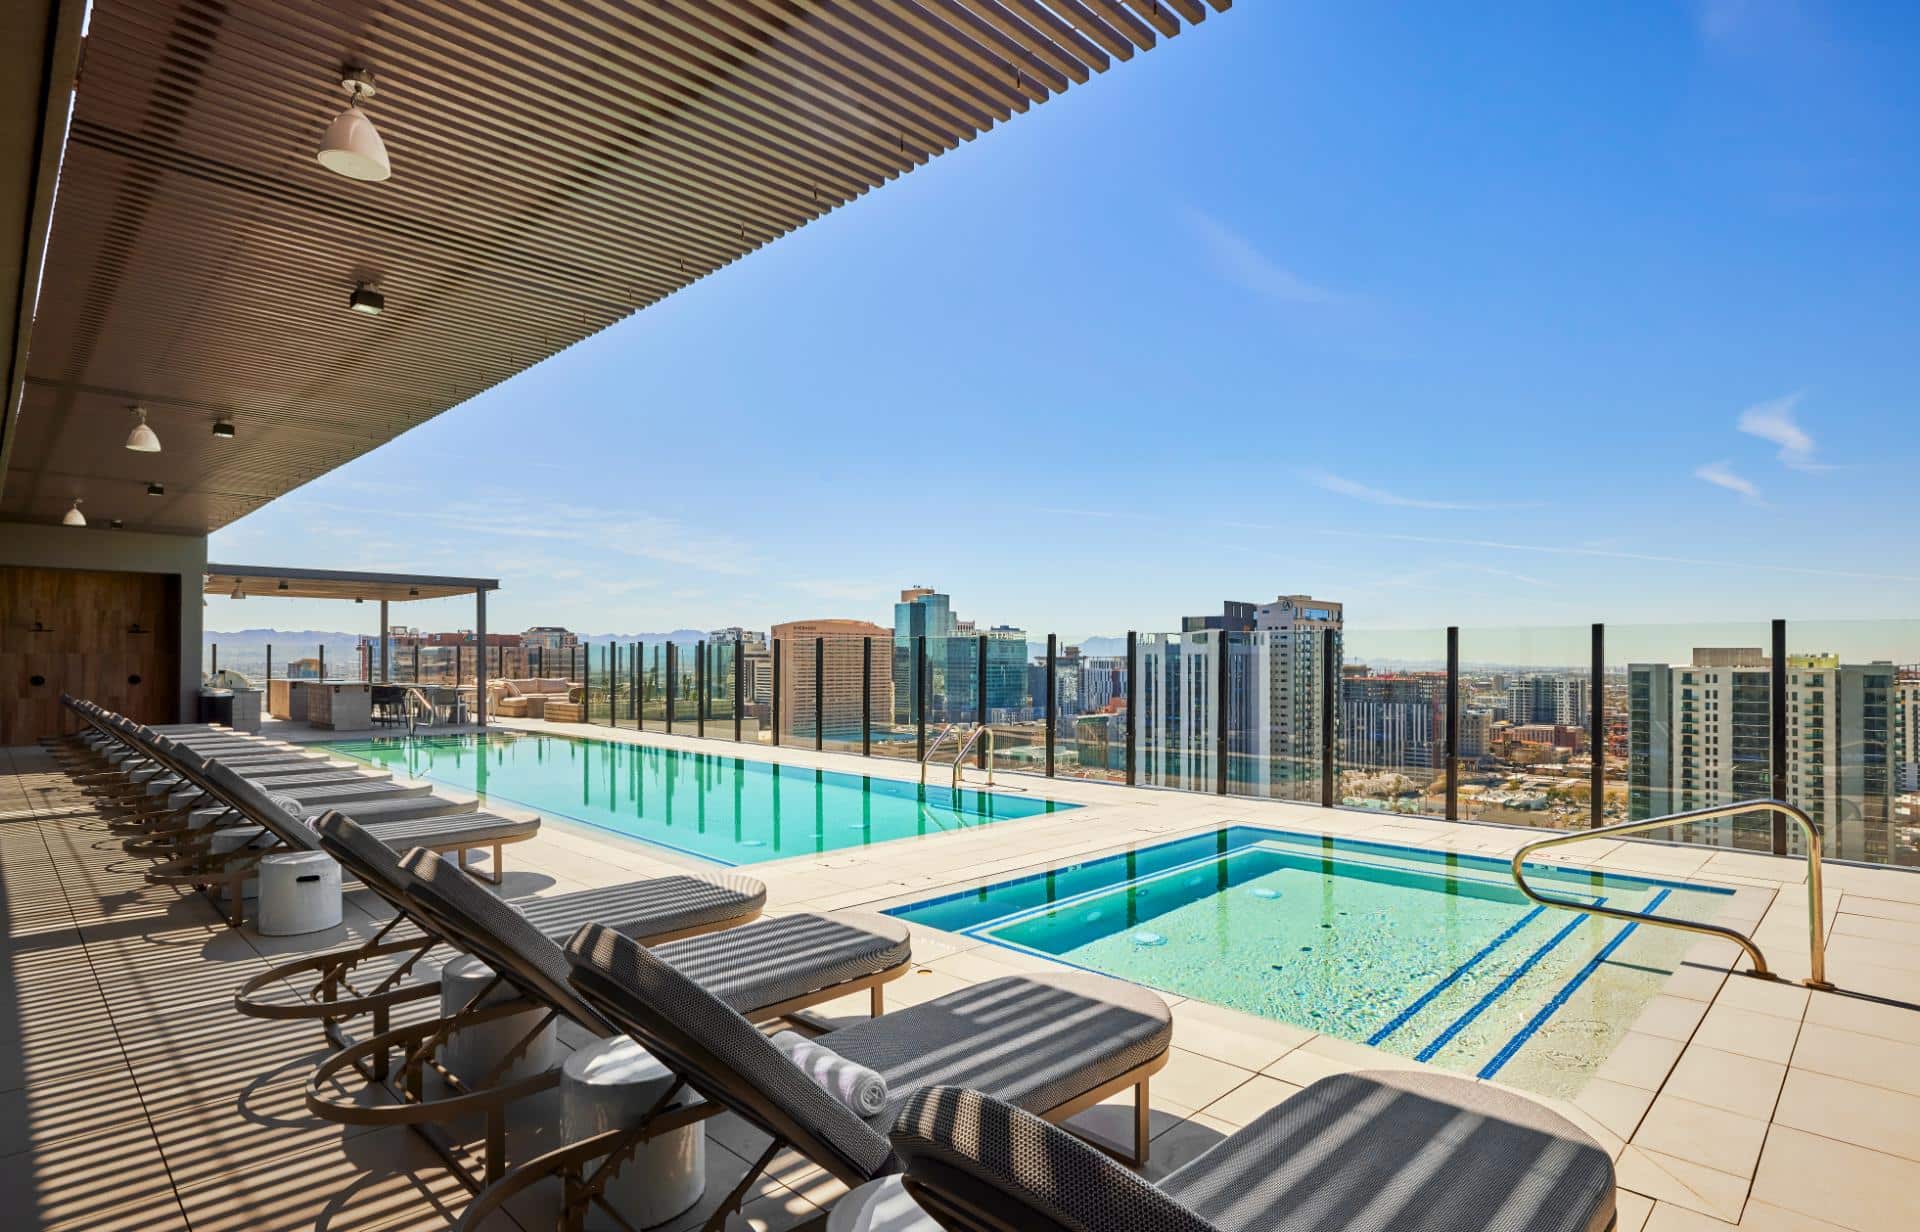 Roof top pool at our Pet friendly apartments in downtown phoenix